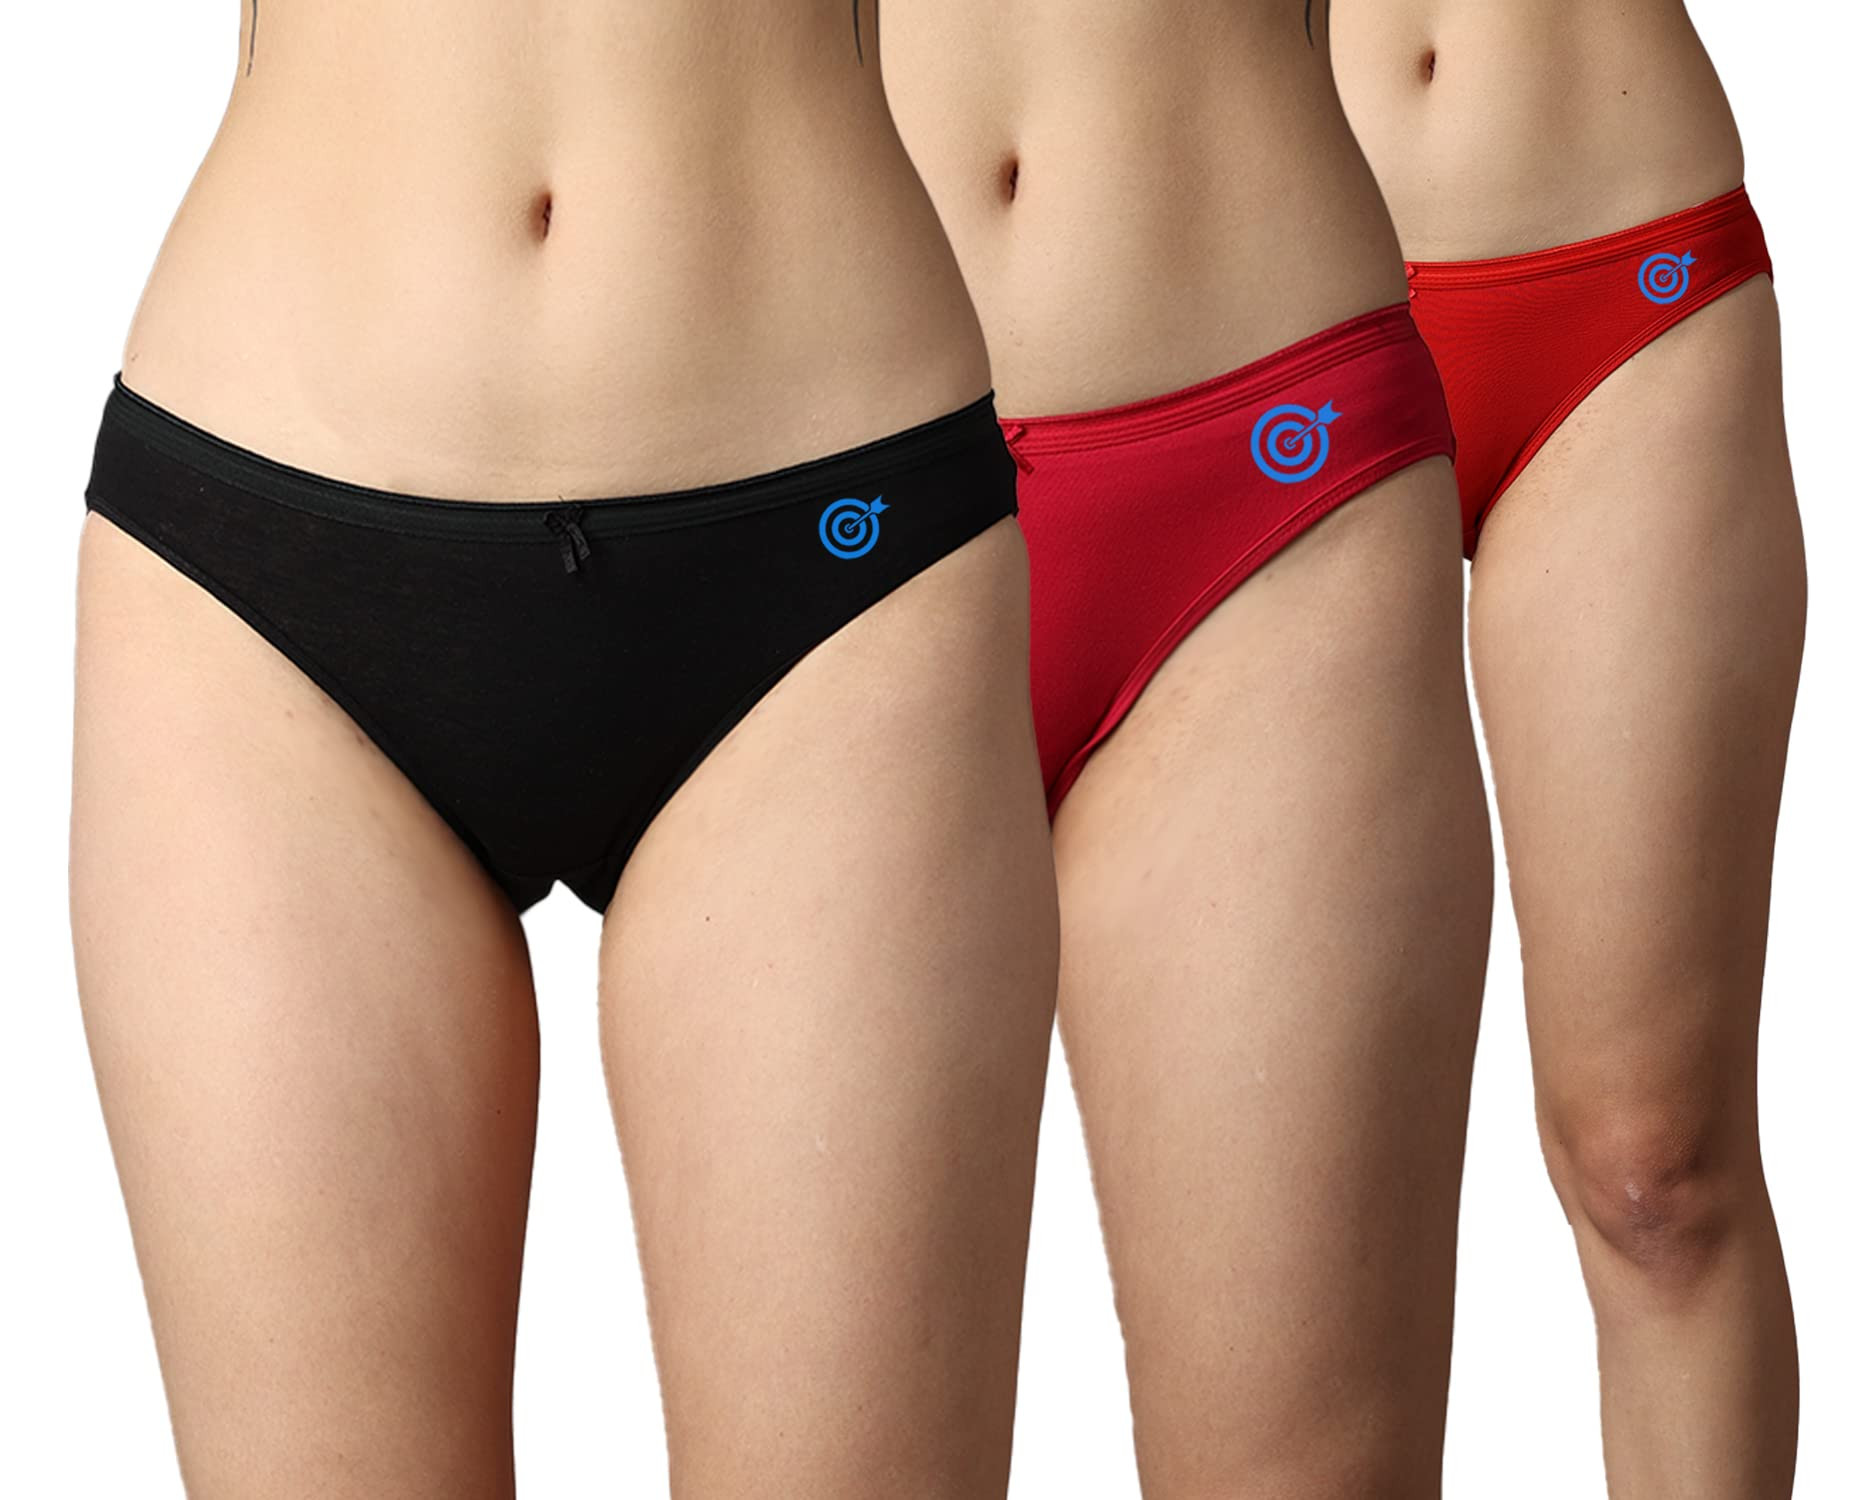 https://www.fastemi.com/uploads/fastemicom/products/wearslim-premium-soft-and-comfortable-cotton-bikini-no-show-panty-invisible-breathable-briefs-soft-stretch-hipster-underwear-pack-of-threesize-xl-268172538672947_l.jpg